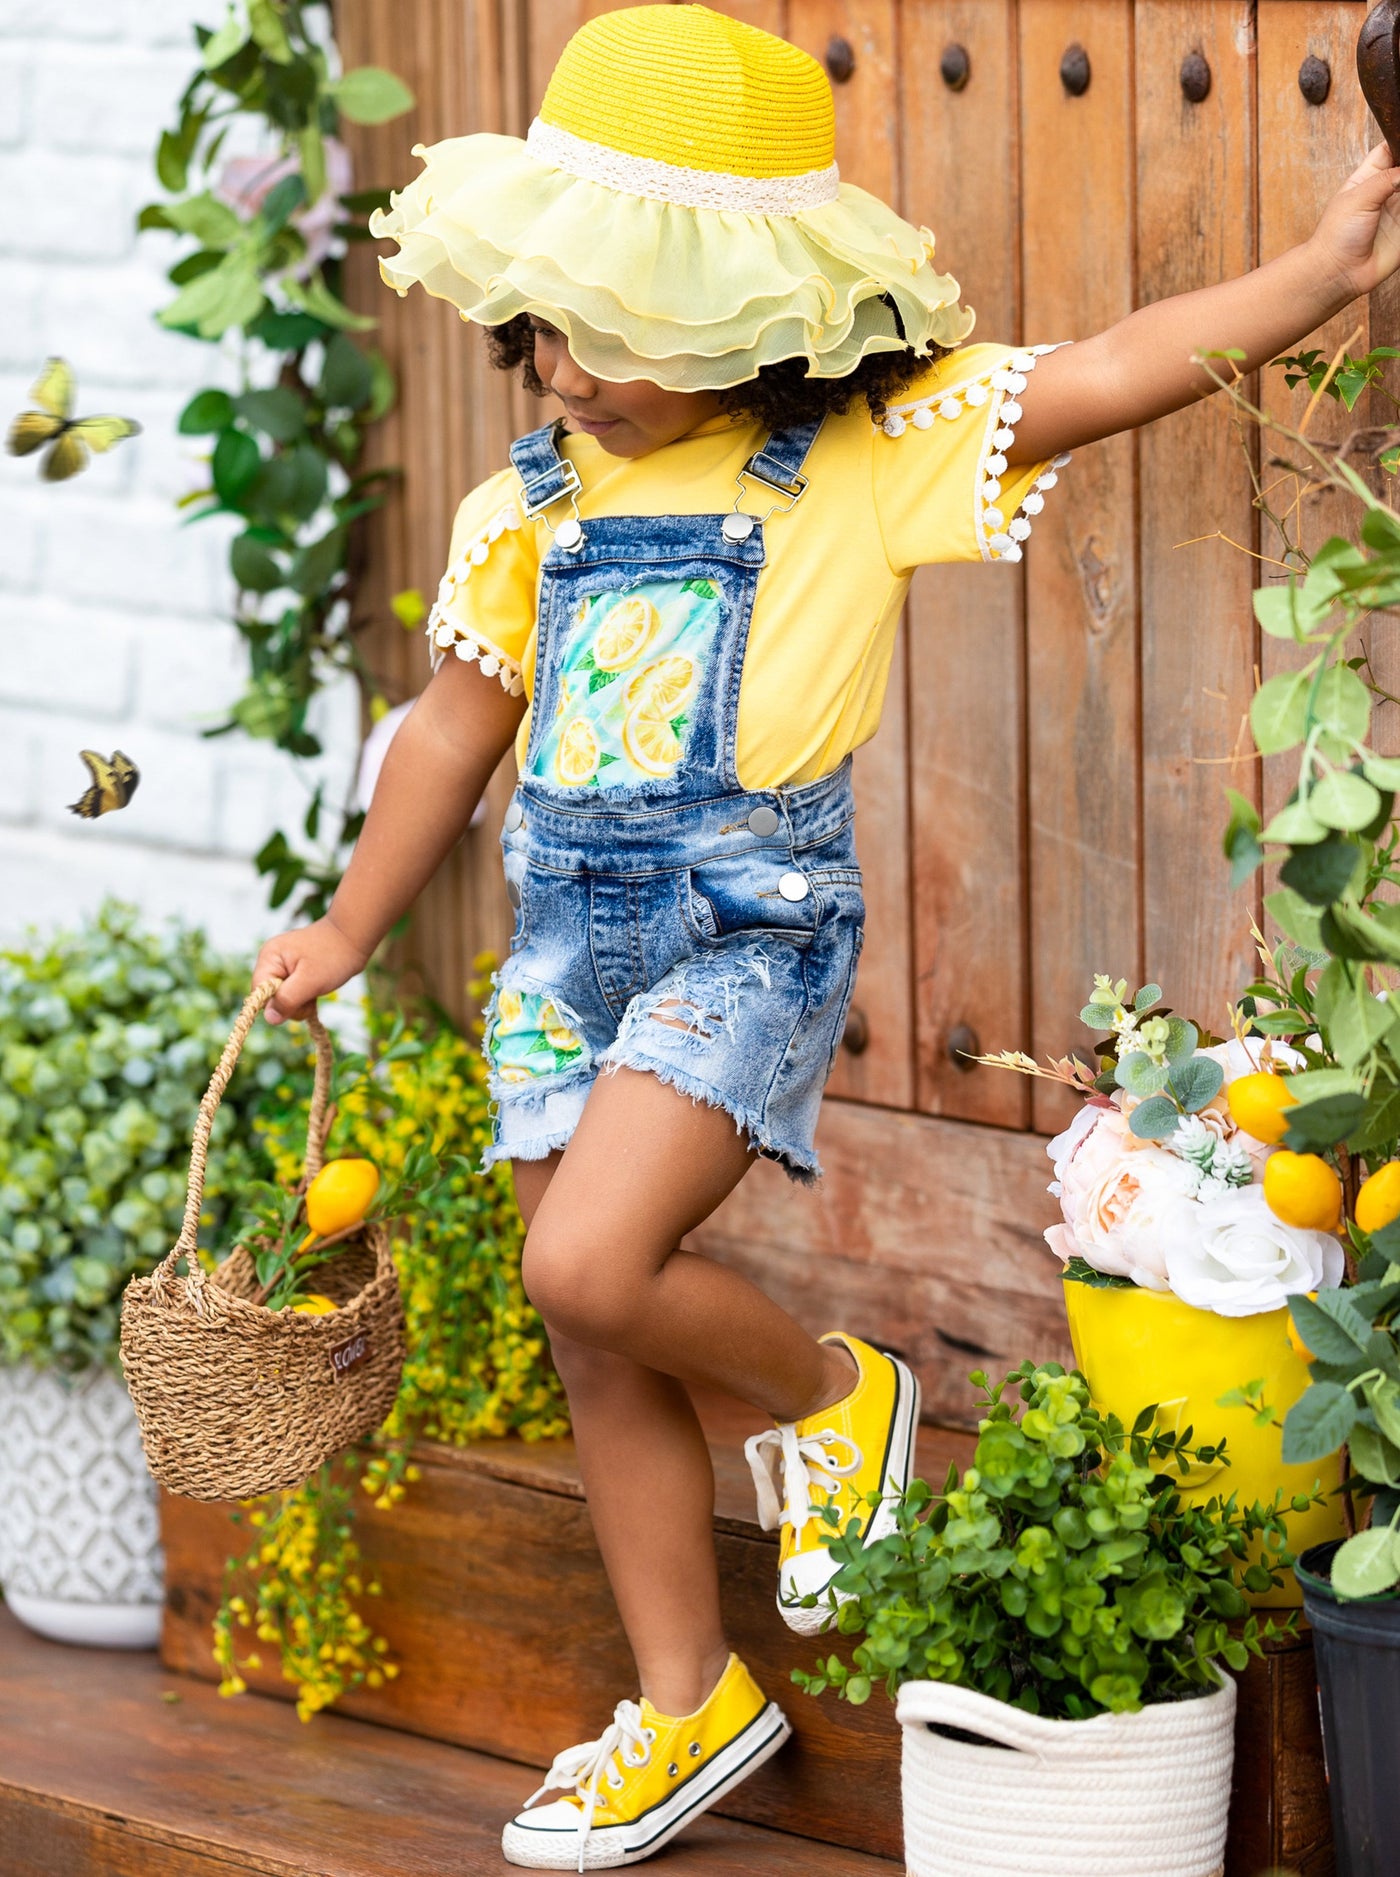 Girls "Lemon Slayed" Top and Patched Denim Overall Short Set